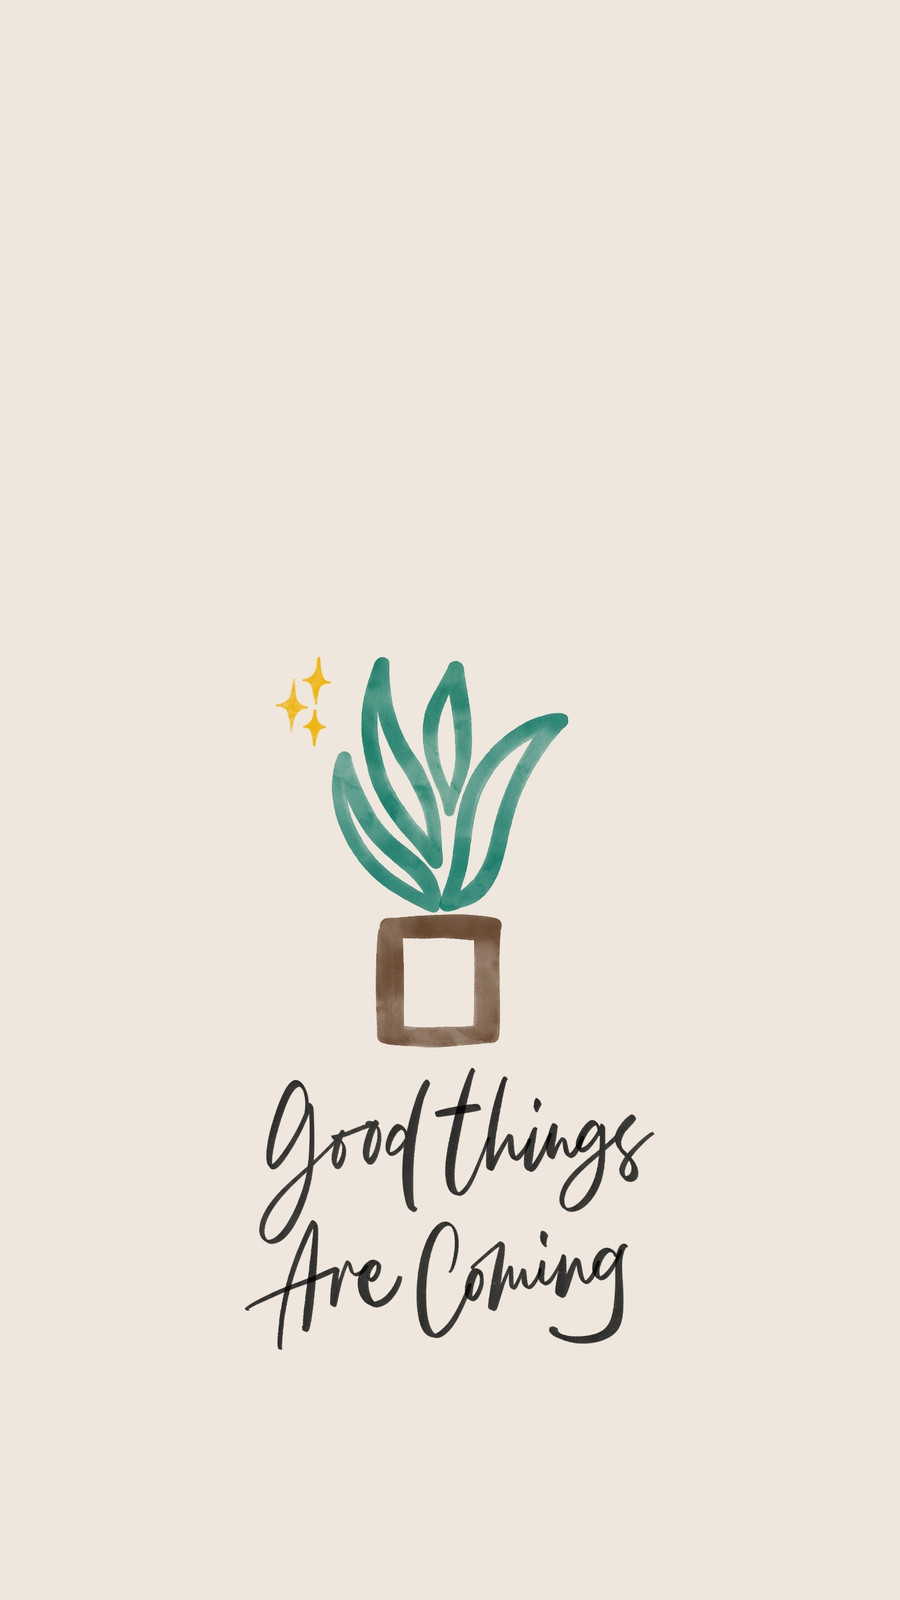 Beige Brown Aesthetic Minimalist Good Things Are Coming Handwritten Motivational Quote Phone Wallpaper